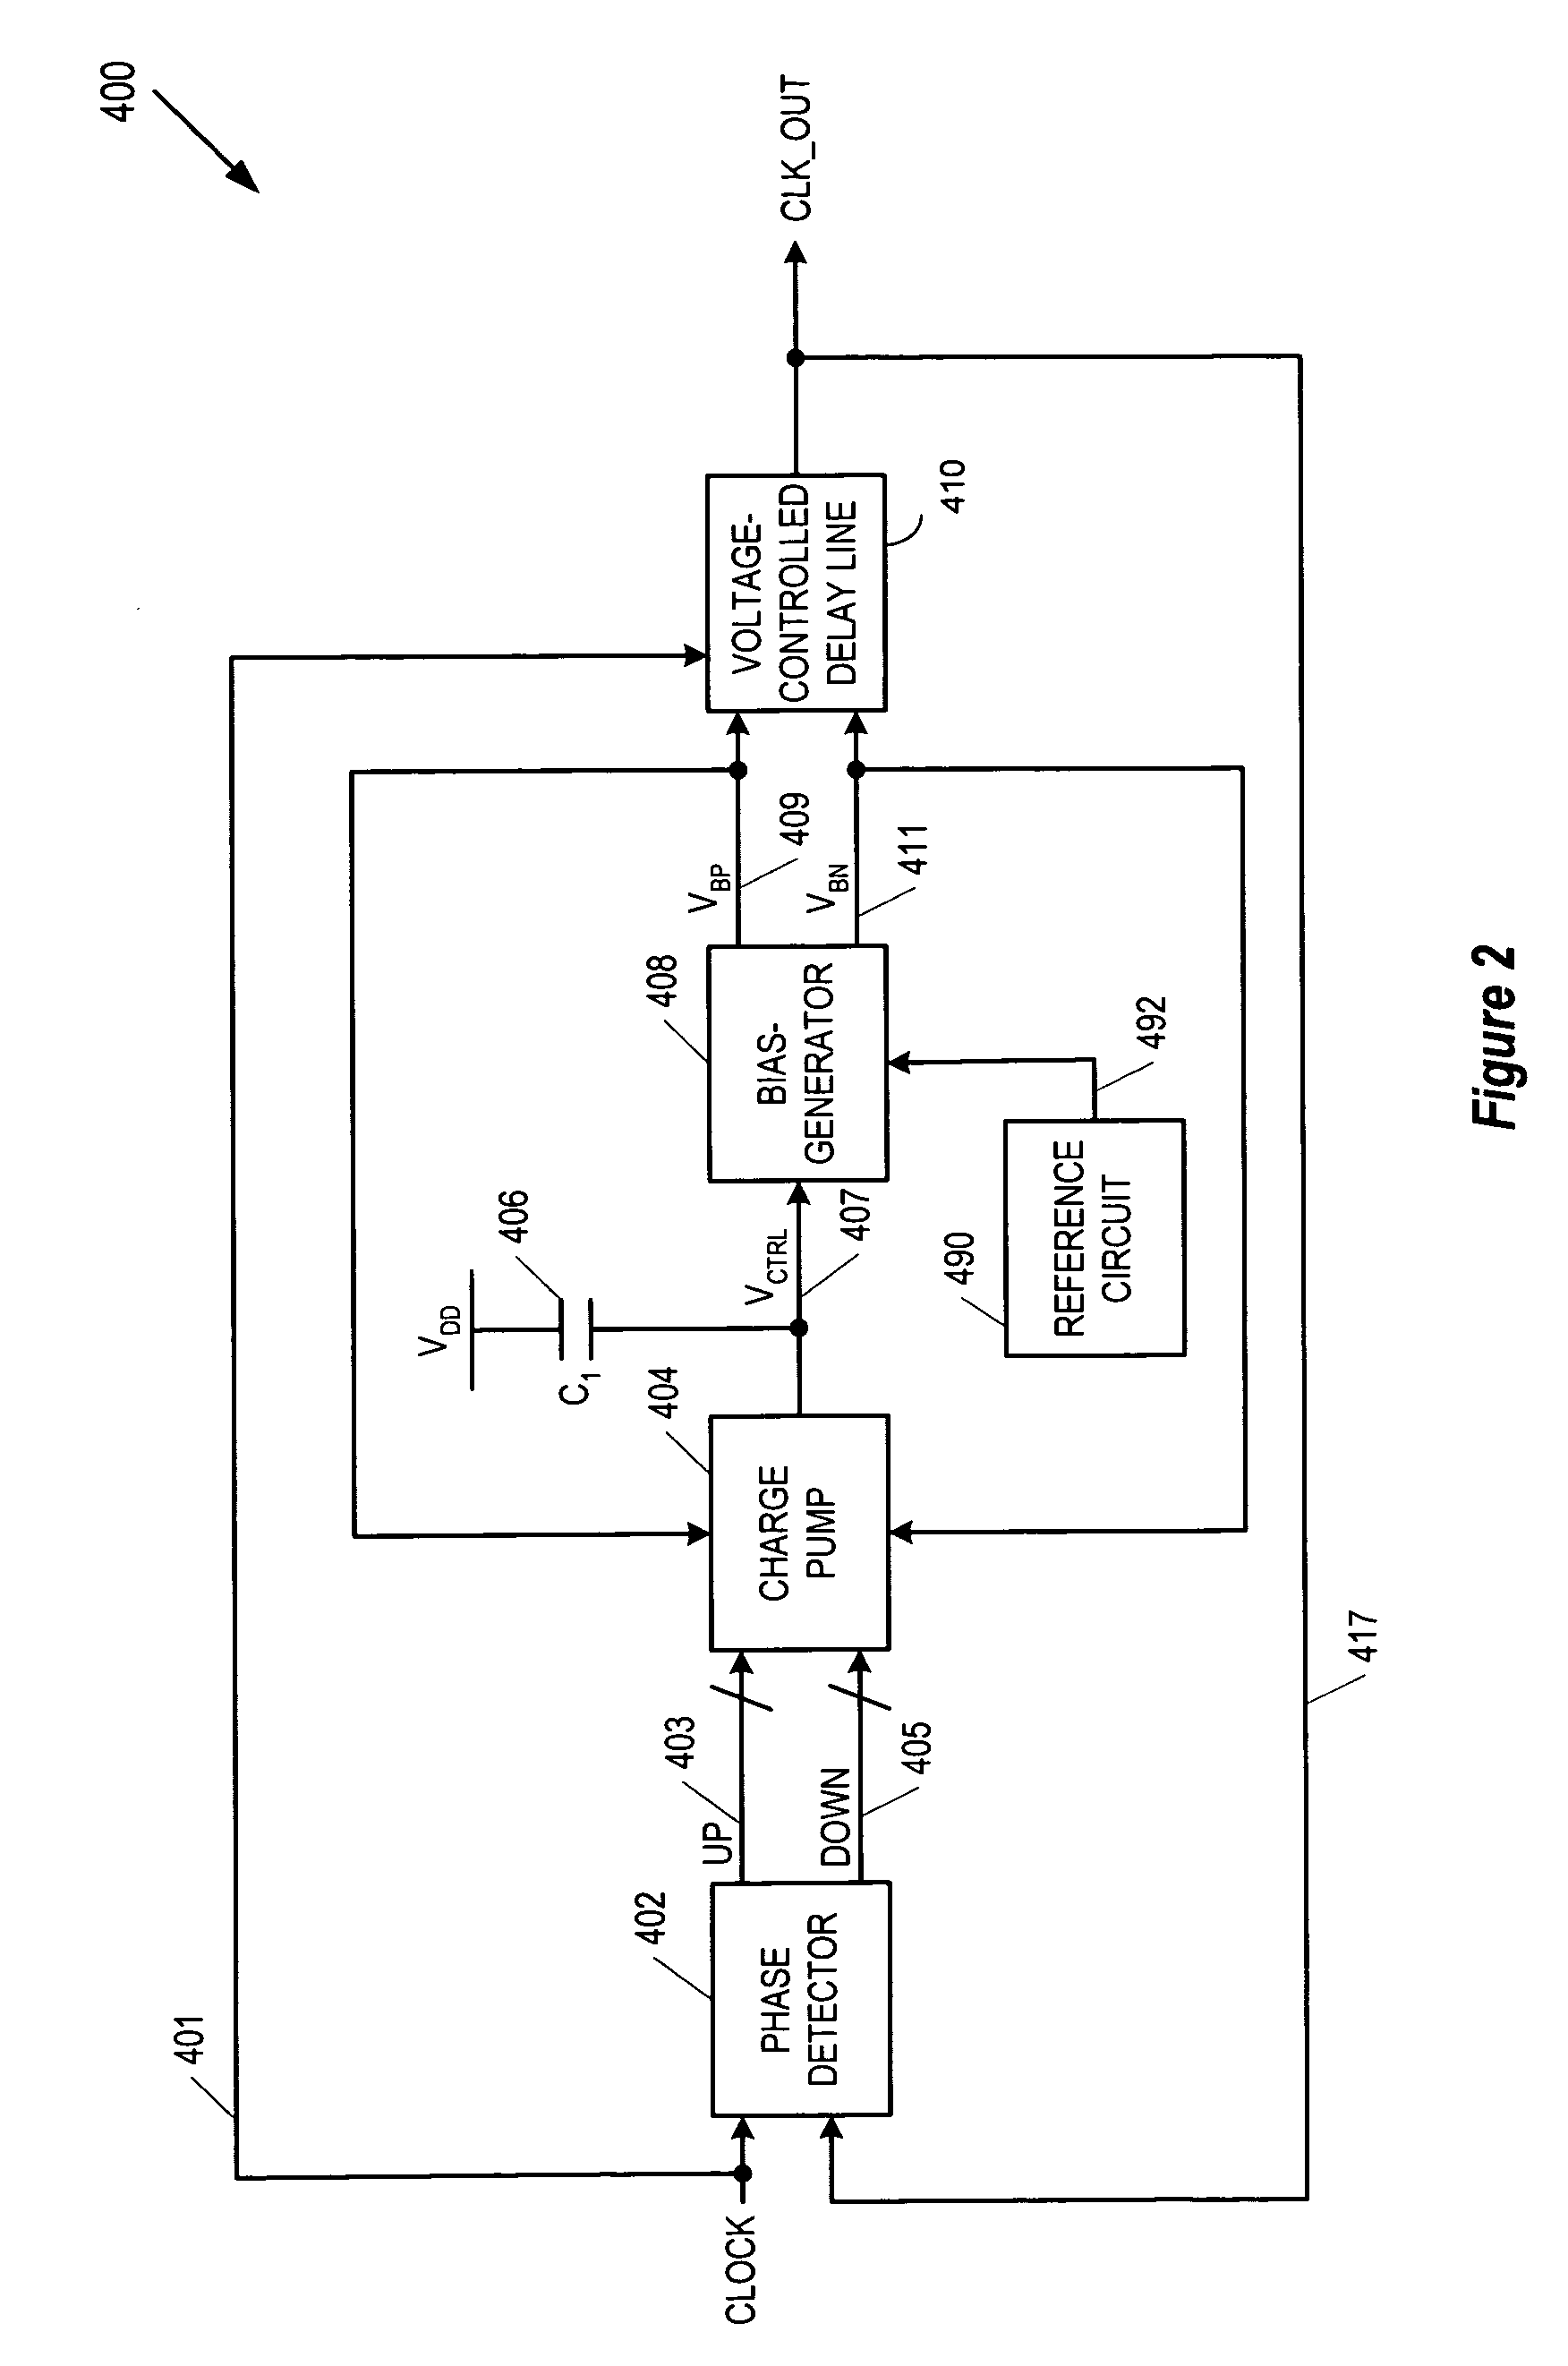 Compensation technique to mitigate aging effects in integrated circuit components